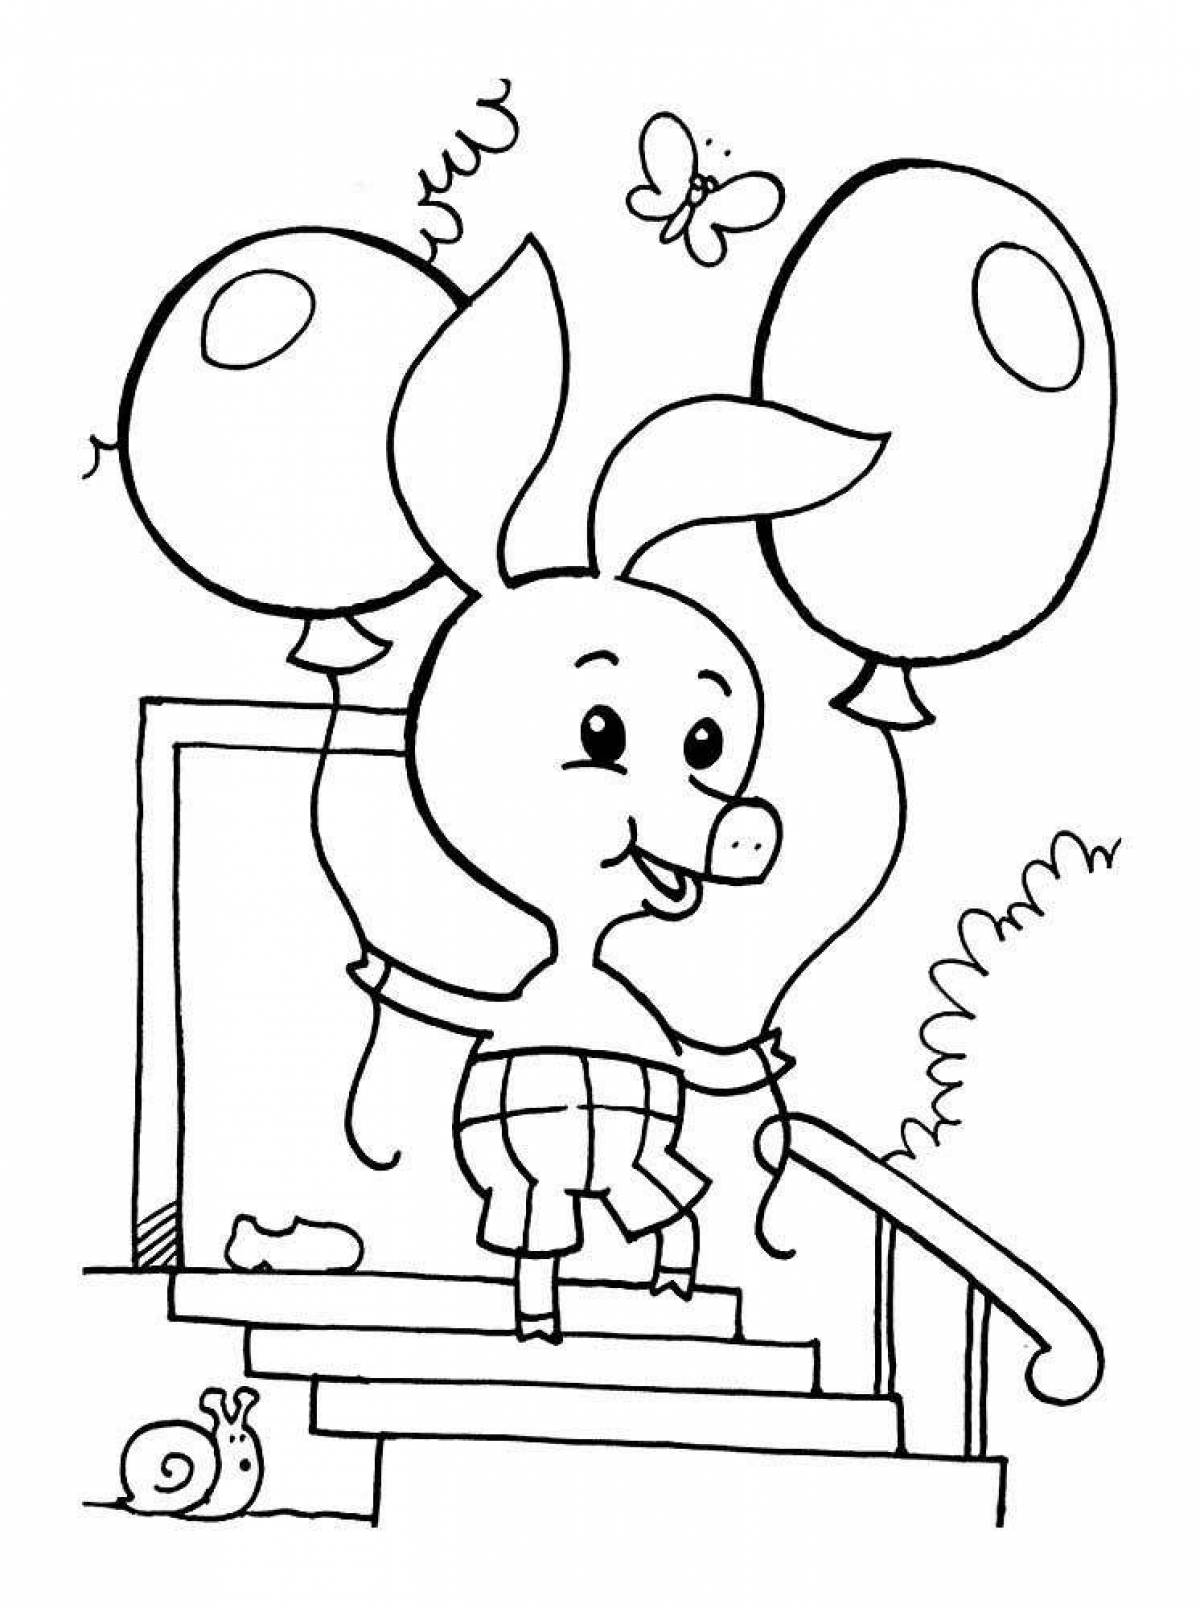 Bright Soviet cartoon coloring pages